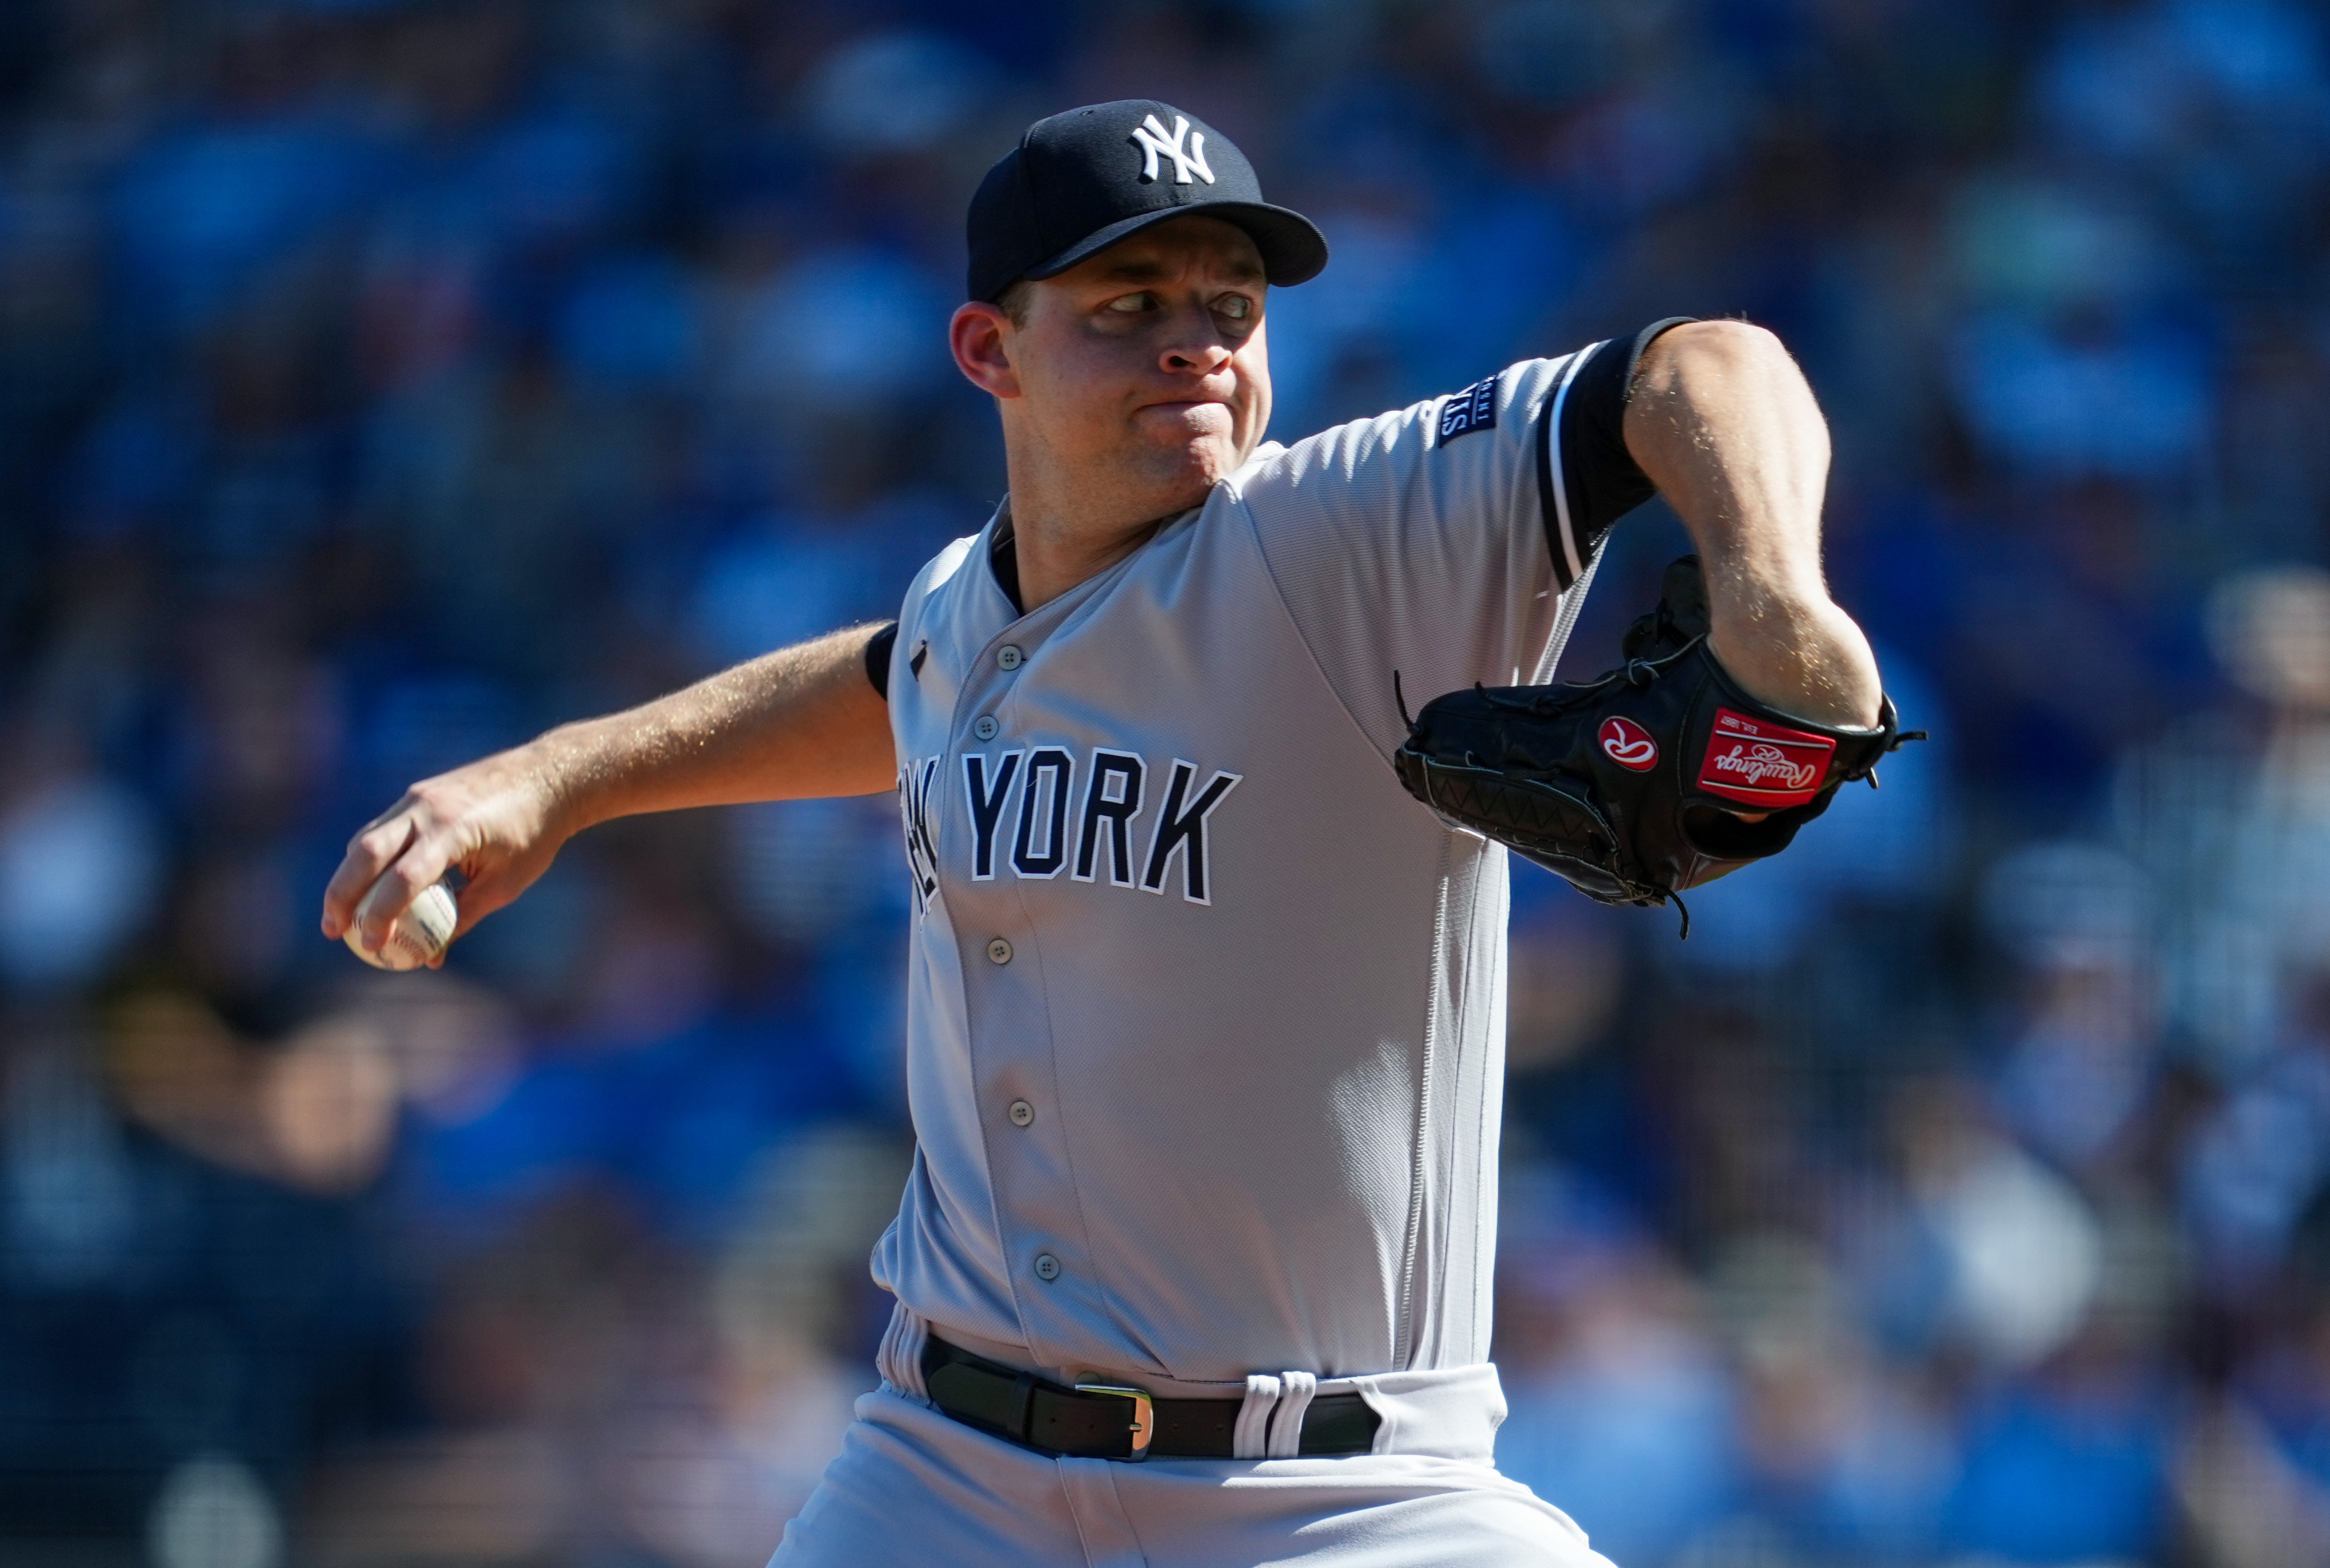 Zack Greinke pitches Royals to 5-2 win over Yankees in what could